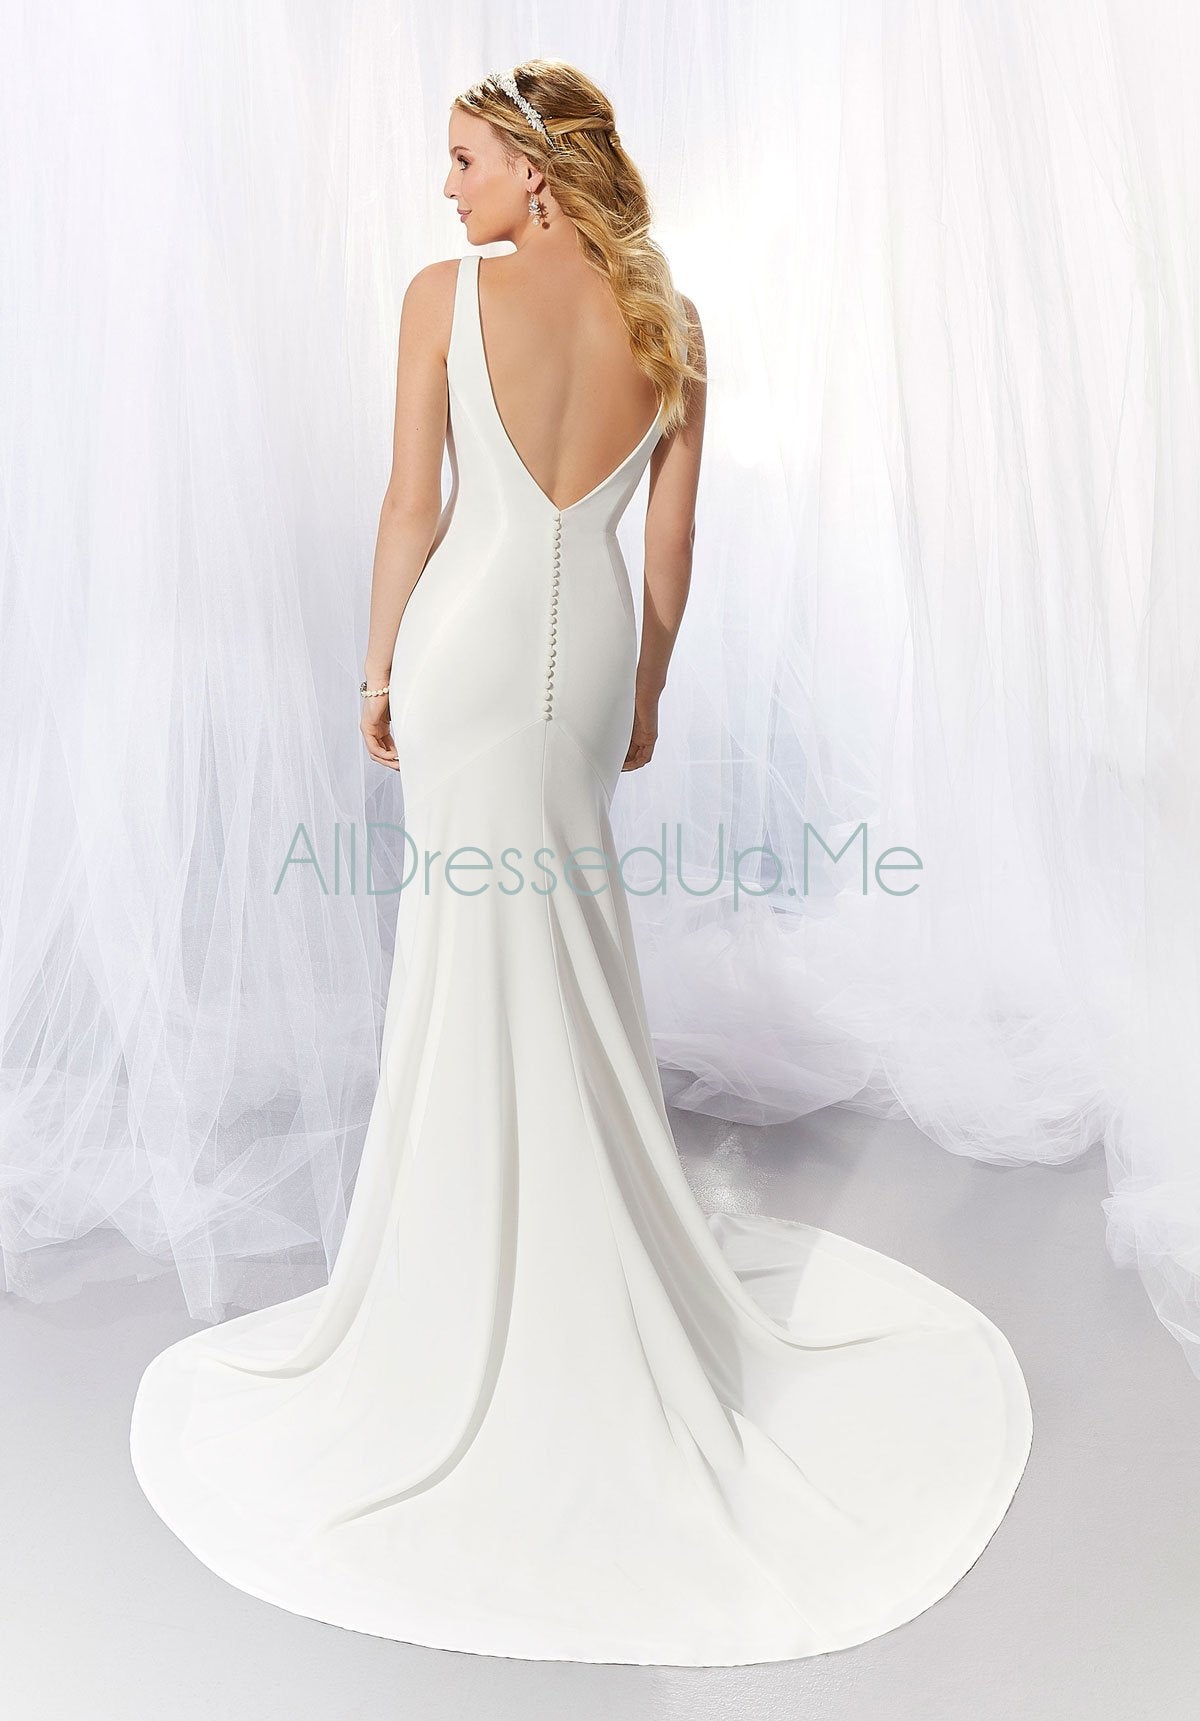 Voyage - Andi - 6936 - Cheron's Bridal, Wedding Gown - Morilee Voyage - - Wedding Gowns Dresses Chattanooga Hixson Shops Boutiques Tennessee TN Georgia GA MSRP Lowest Prices Sale Discount